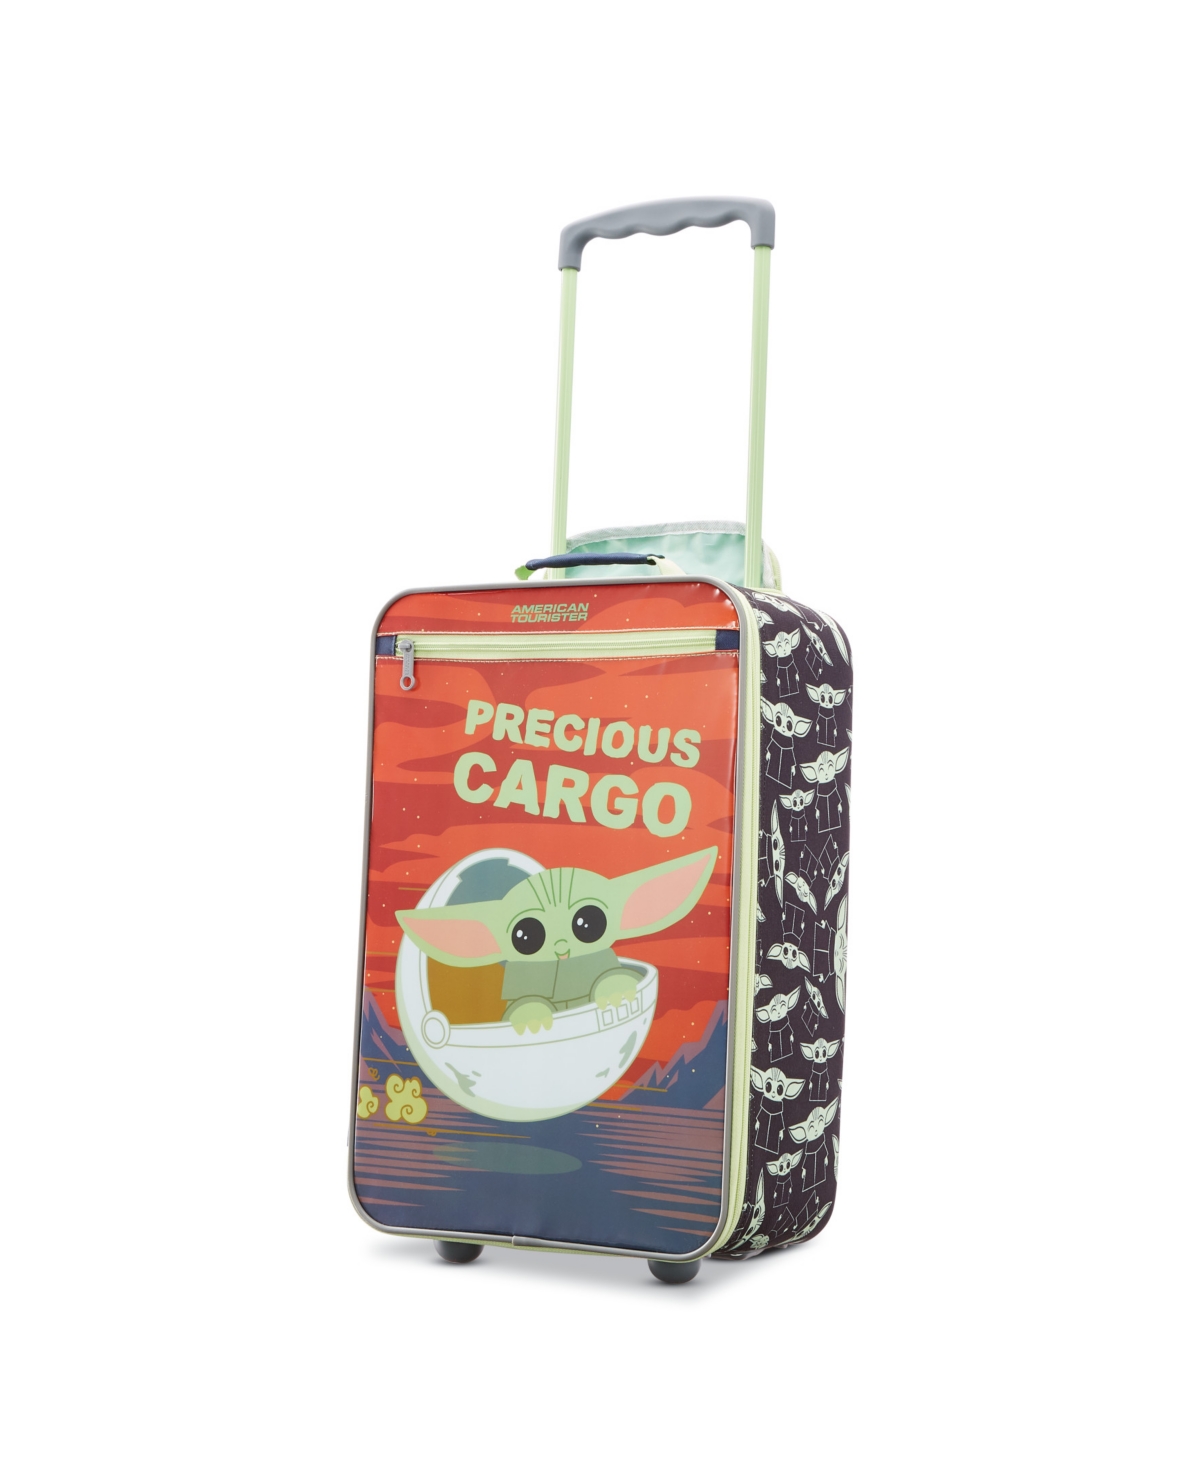 The Child 18" Softside Carry-on Luggage - Star Wars The Child